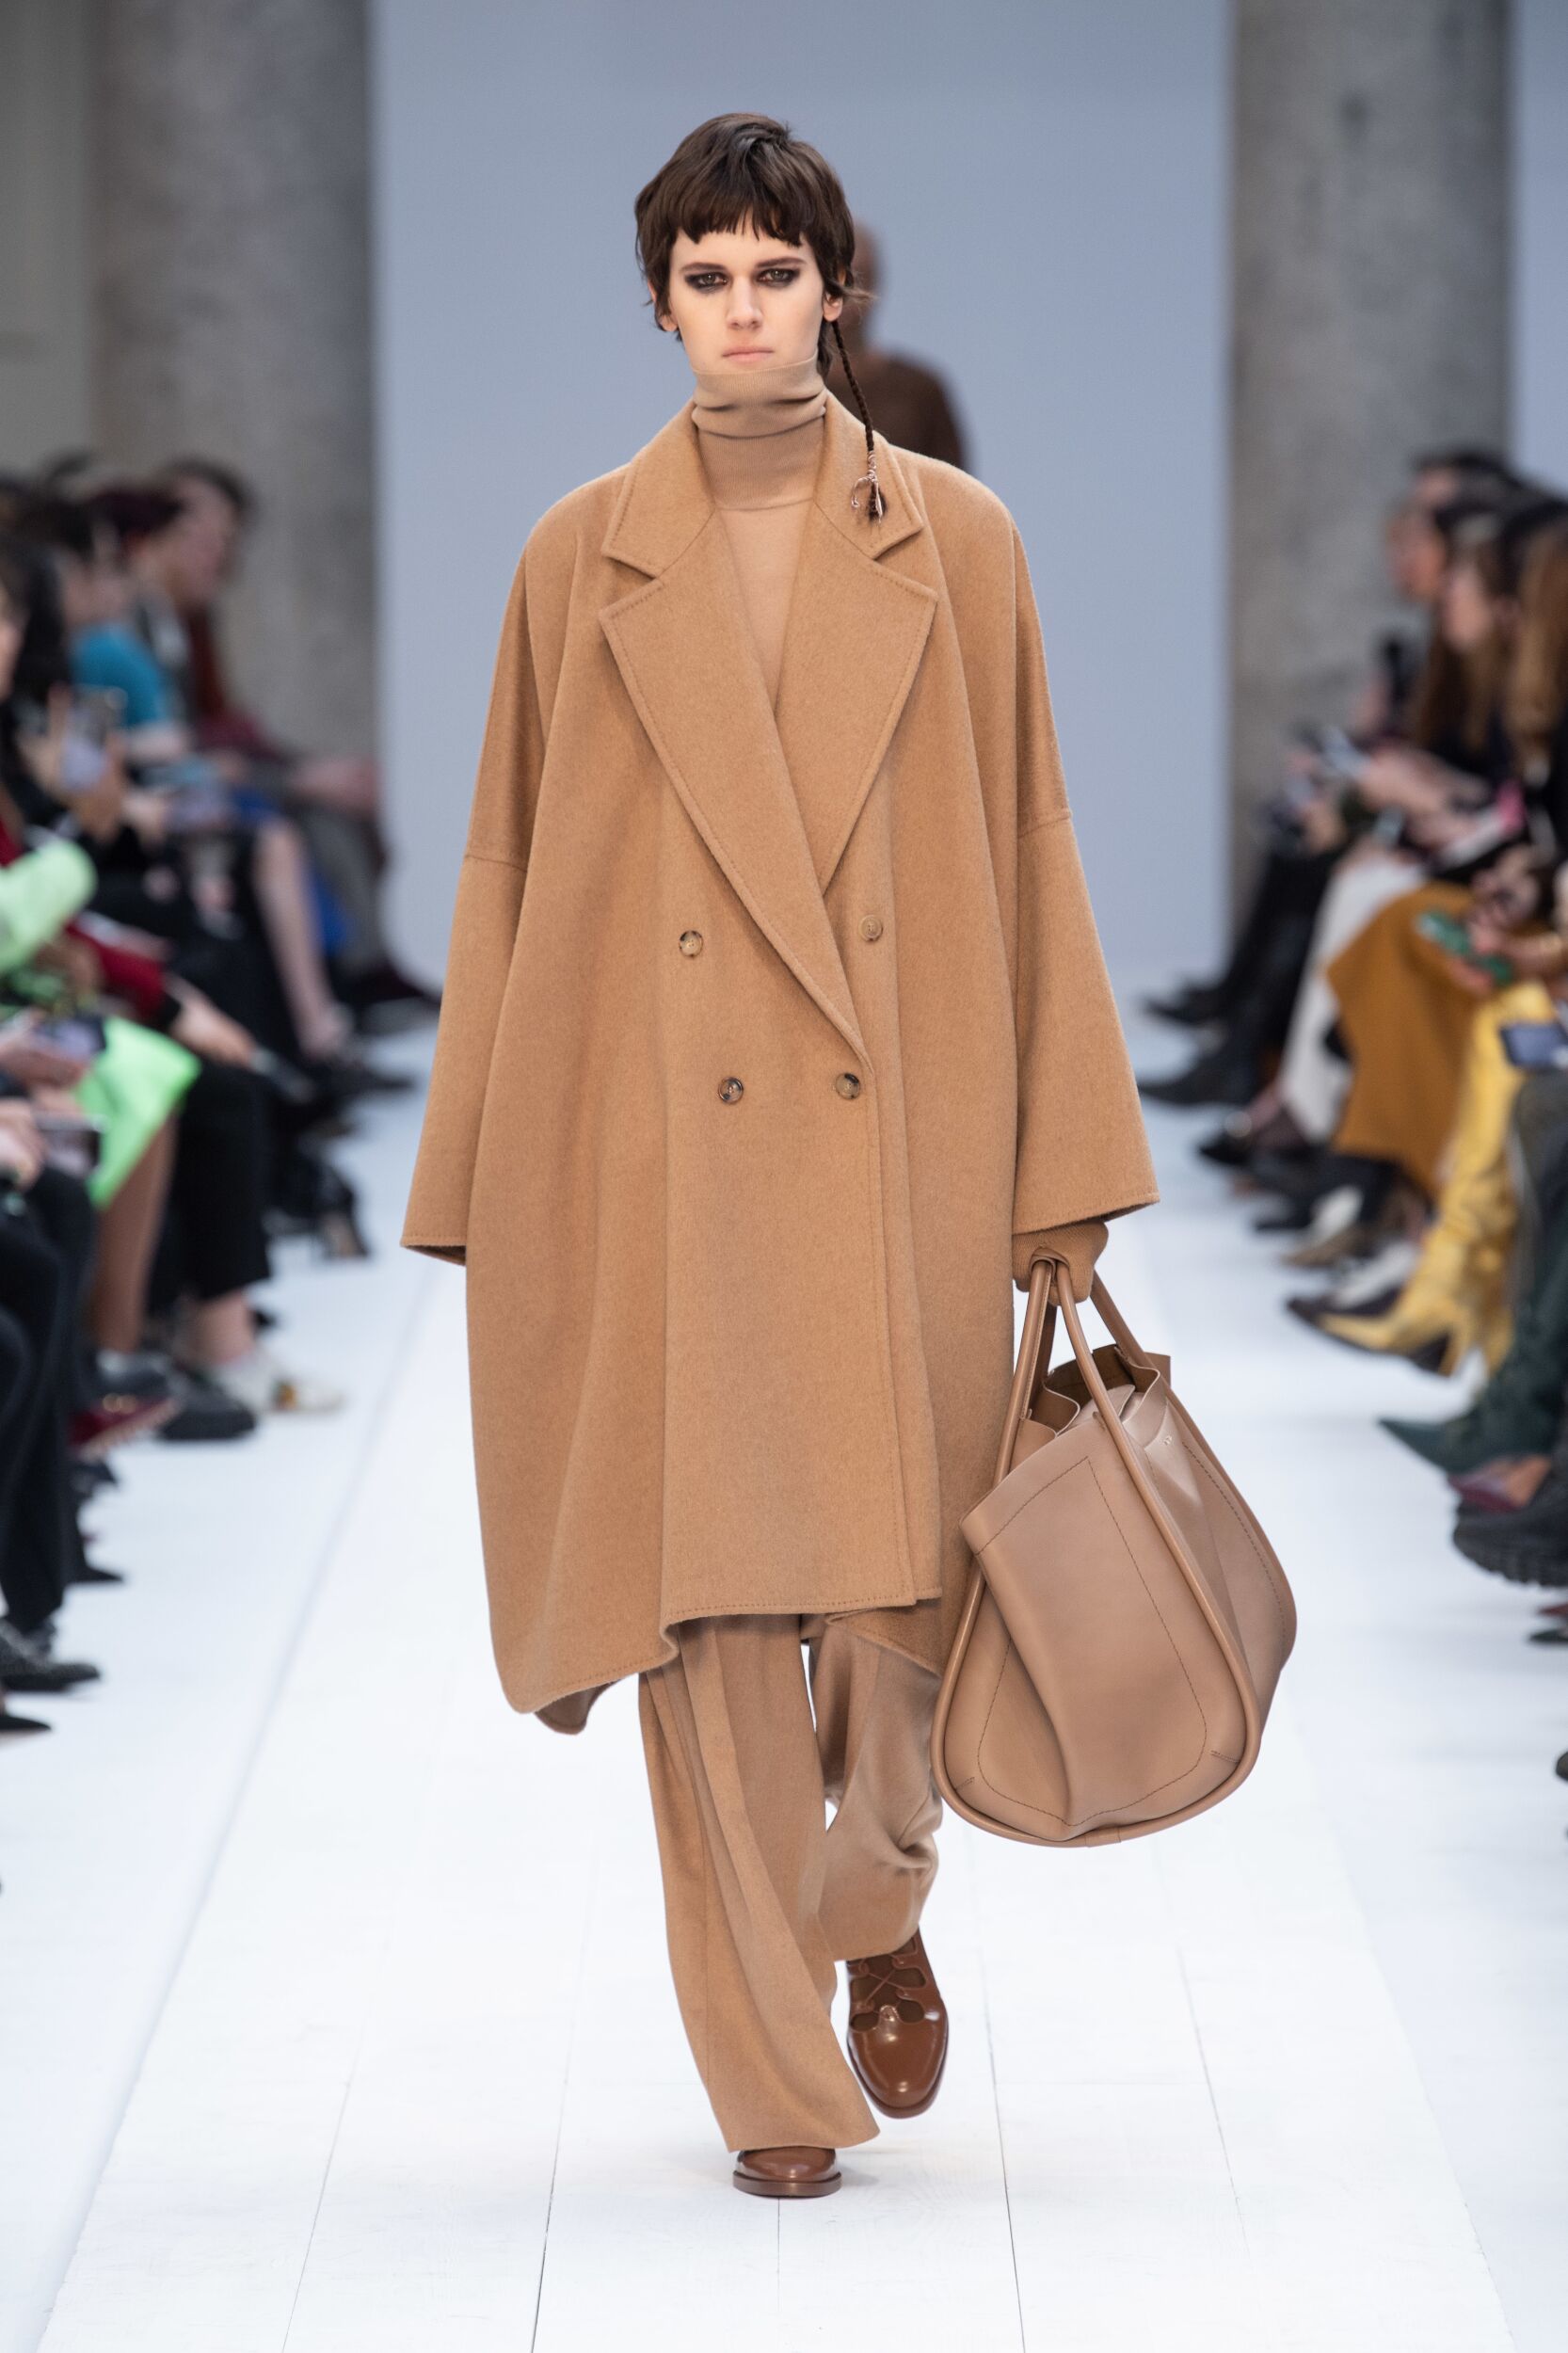 MAX MARA FALL WINTER 2020 WOMEN’S COLLECTION | The Skinny Beep